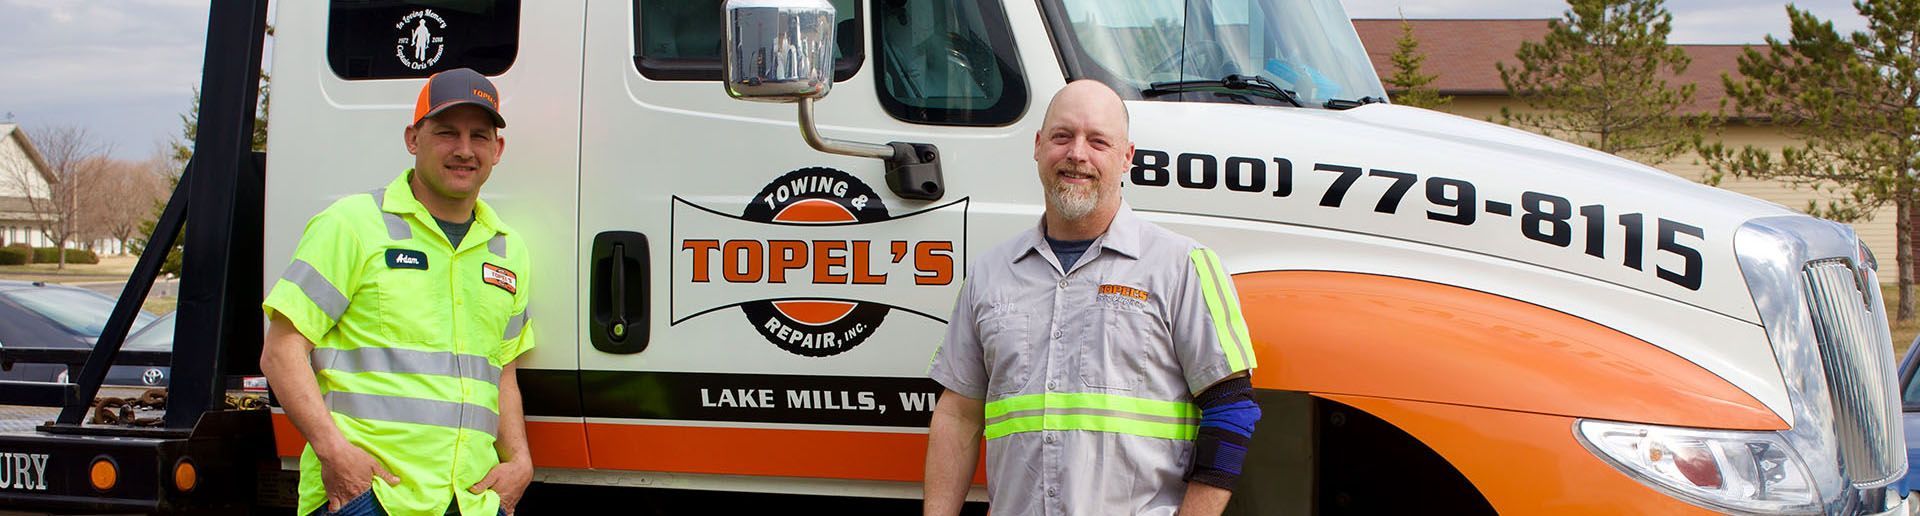 About Us - Topel's Towing & Repair, Inc.
